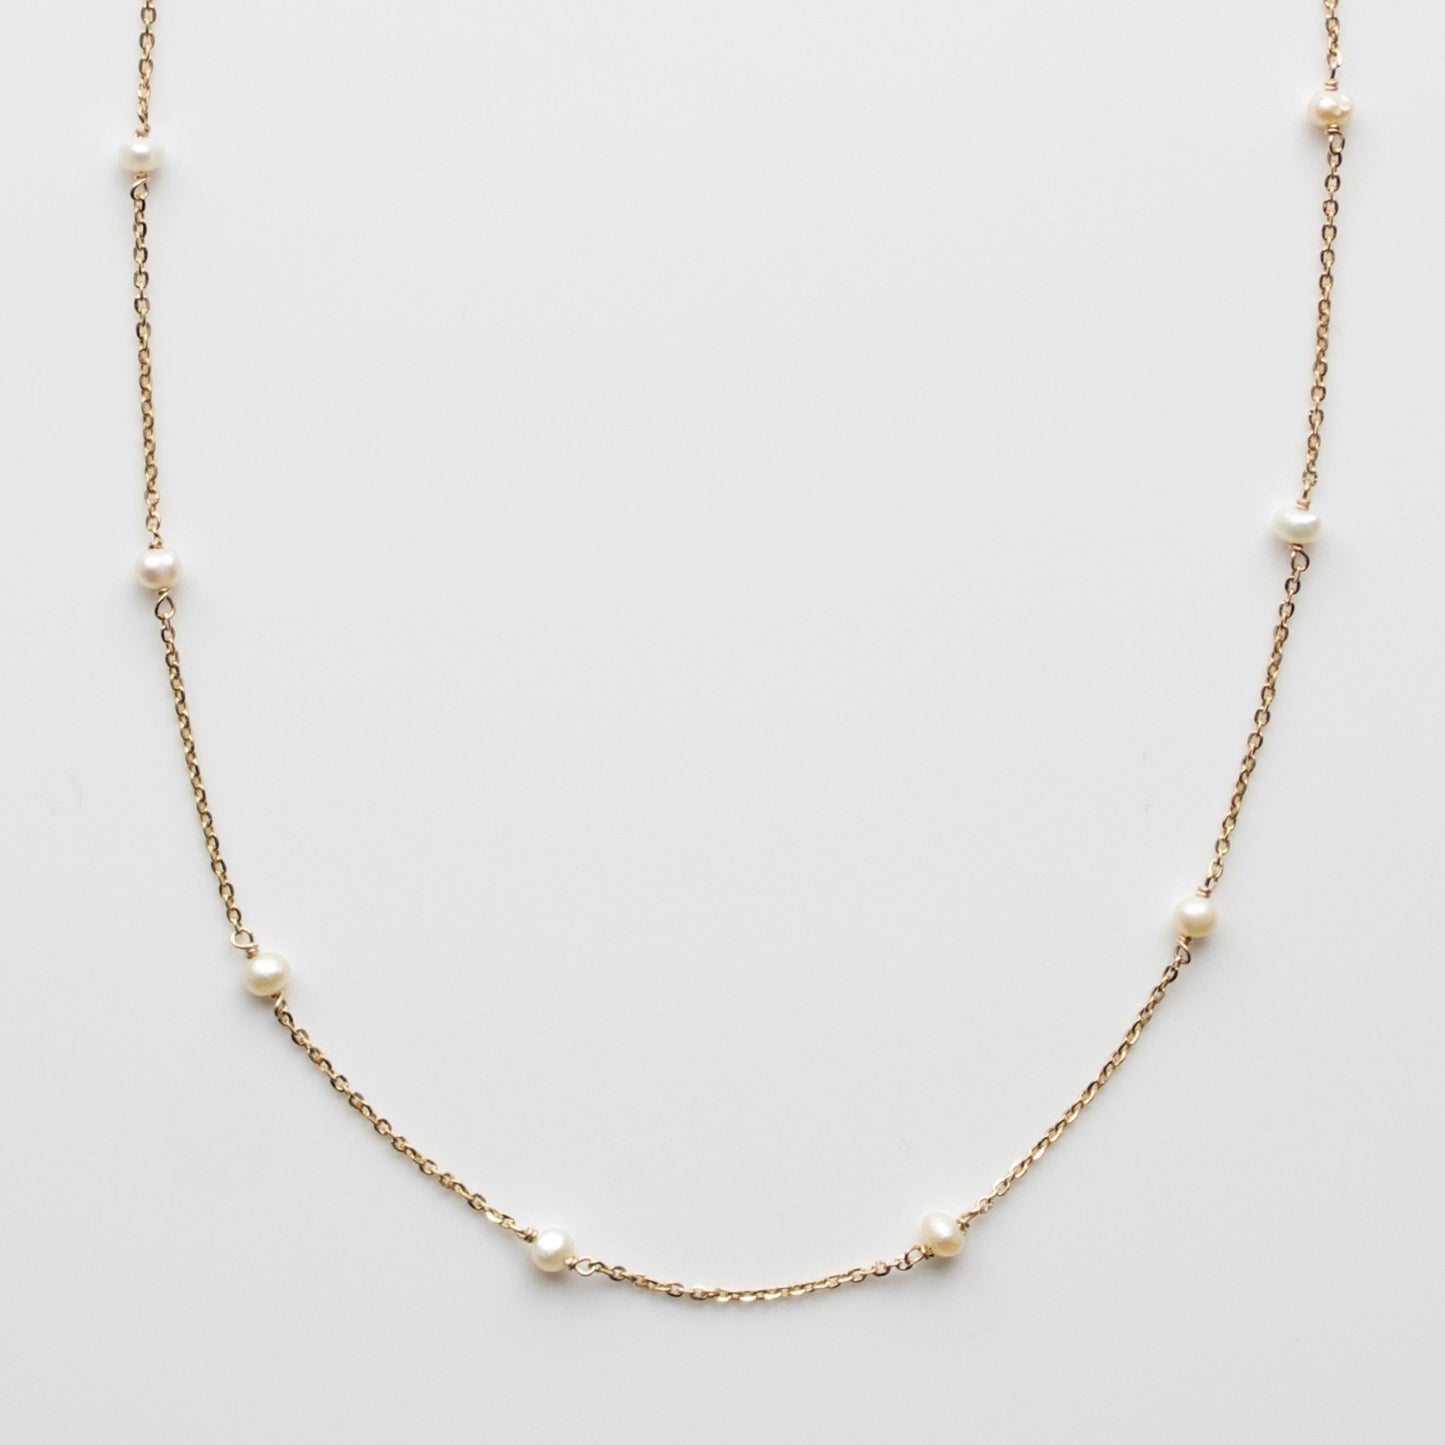 Carrie elizabeth pearl beaded necklace in solid gold